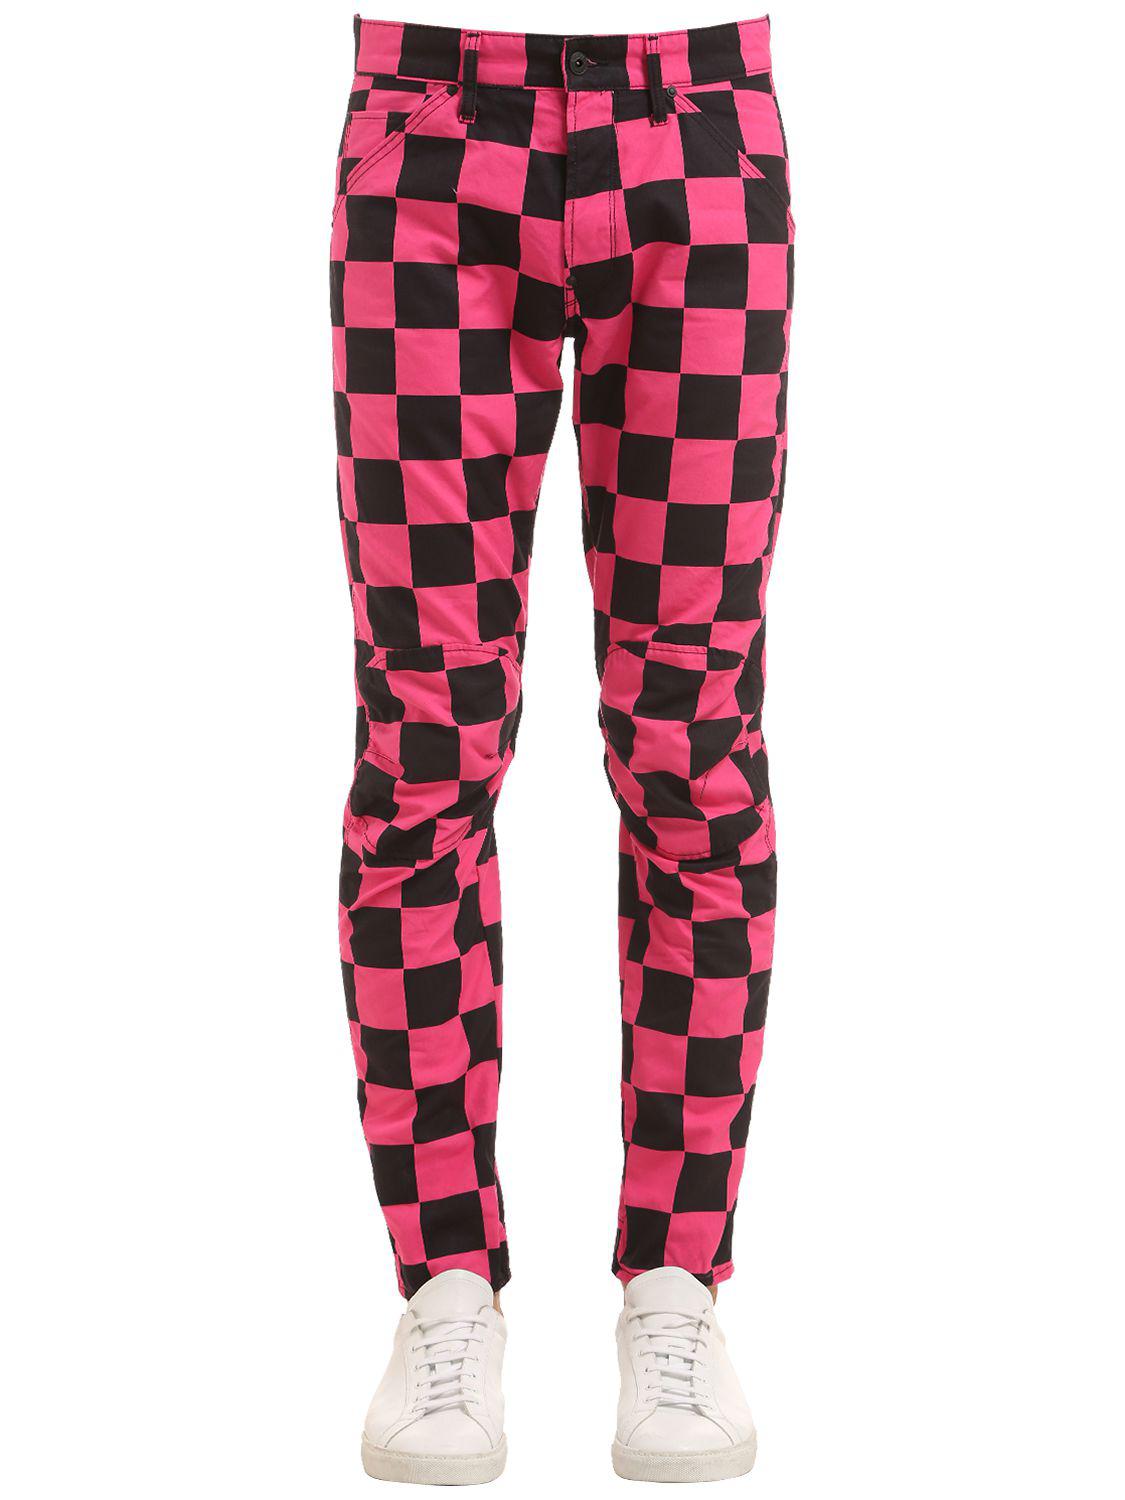 G-Star RAW Elwood Chef's Check Printed Jeans in Pink for Men | Lyst Canada